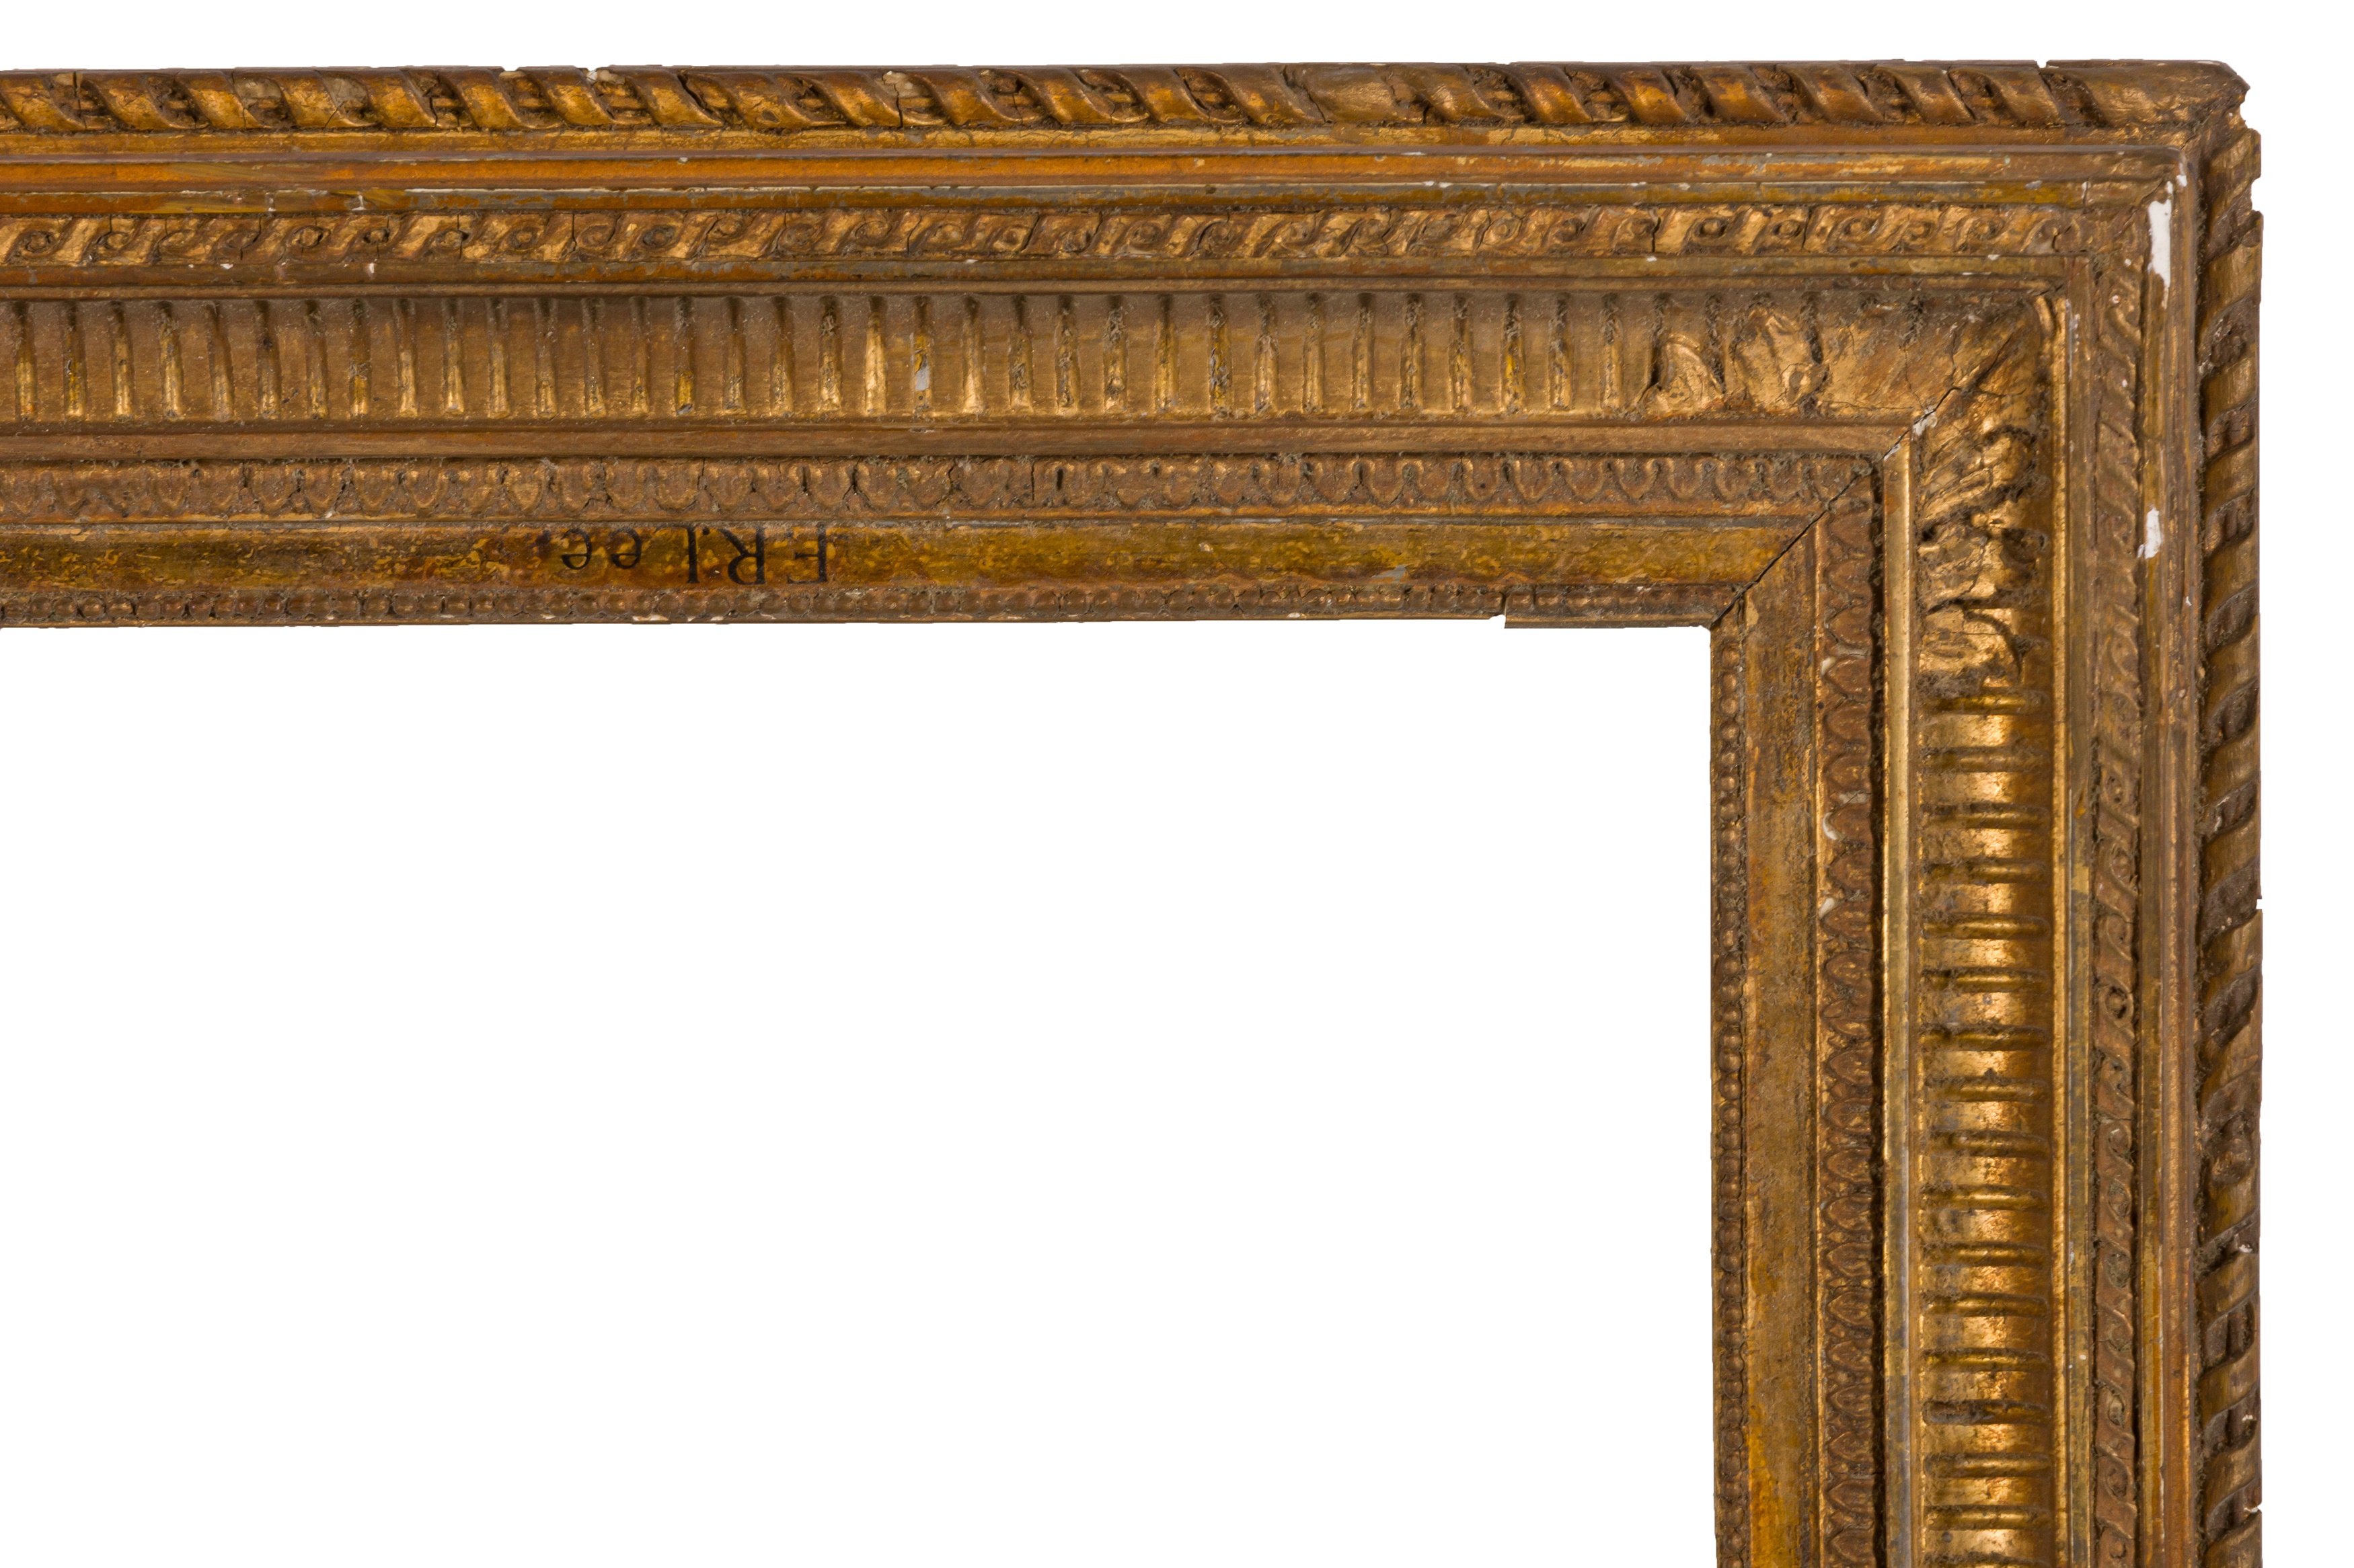 A FRENCH 19TH CENTURY GILDED COMPOSITION EMPIRE FRAME - Image 2 of 4